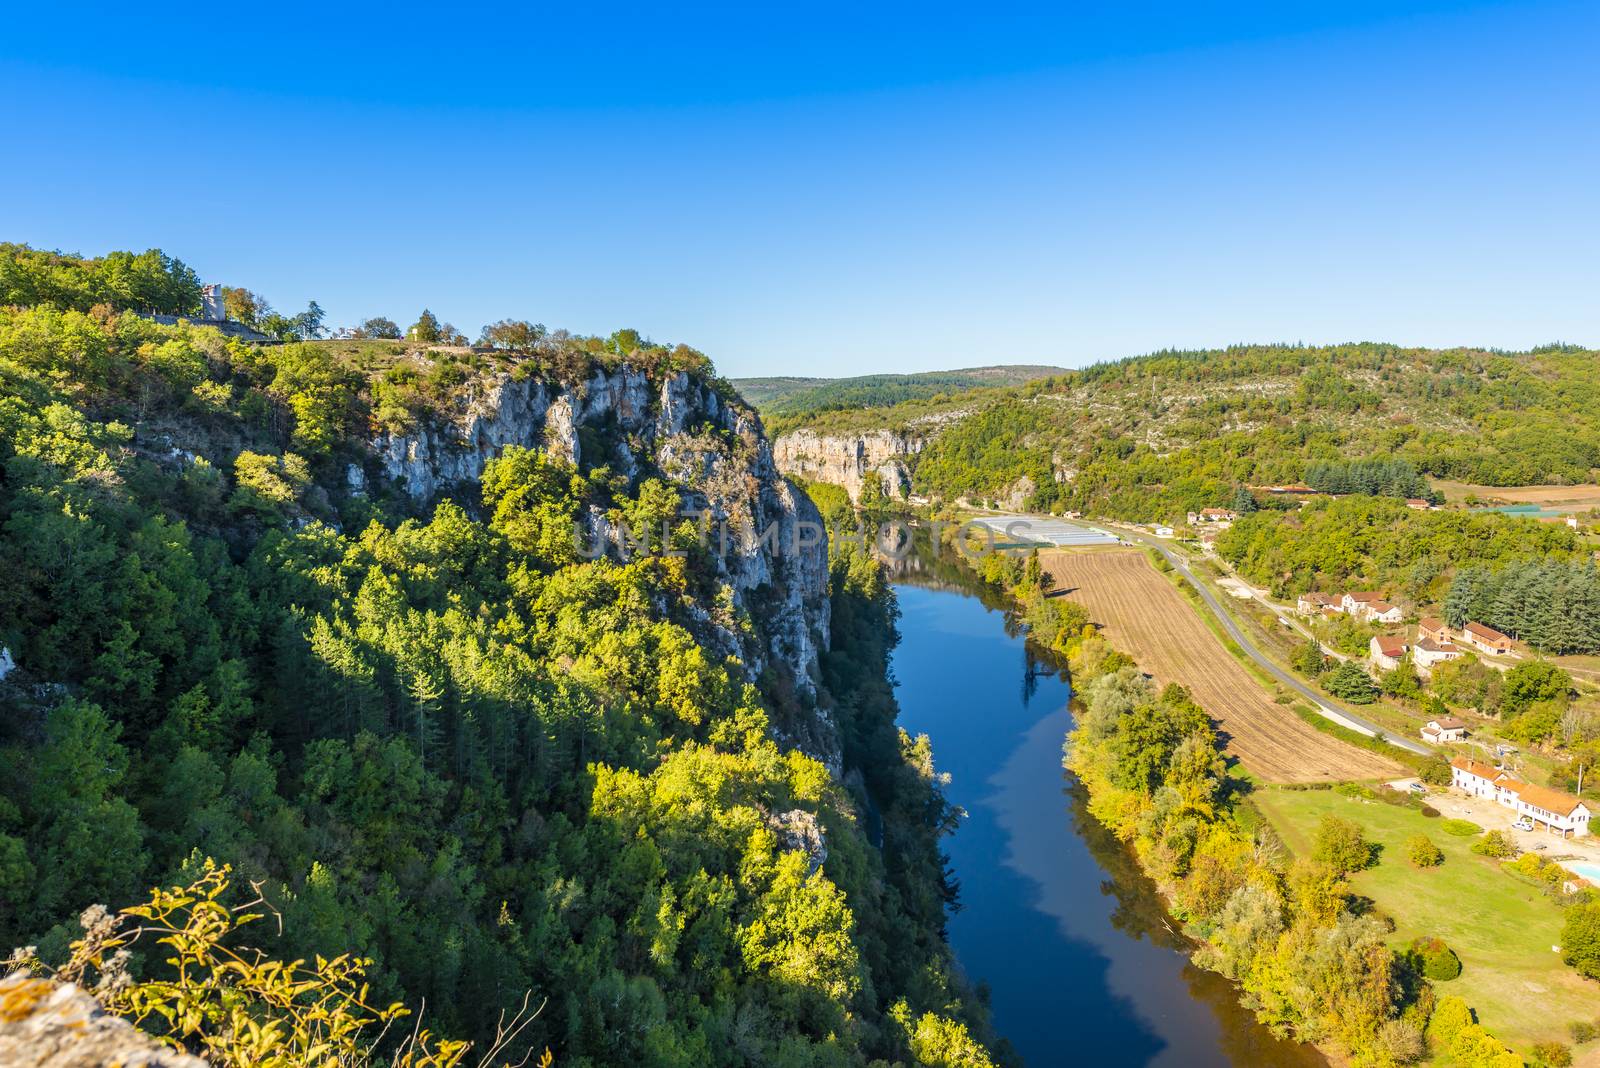 Lot Valley in Saint Cirq Lapopie, Occitanie in France by Frederic